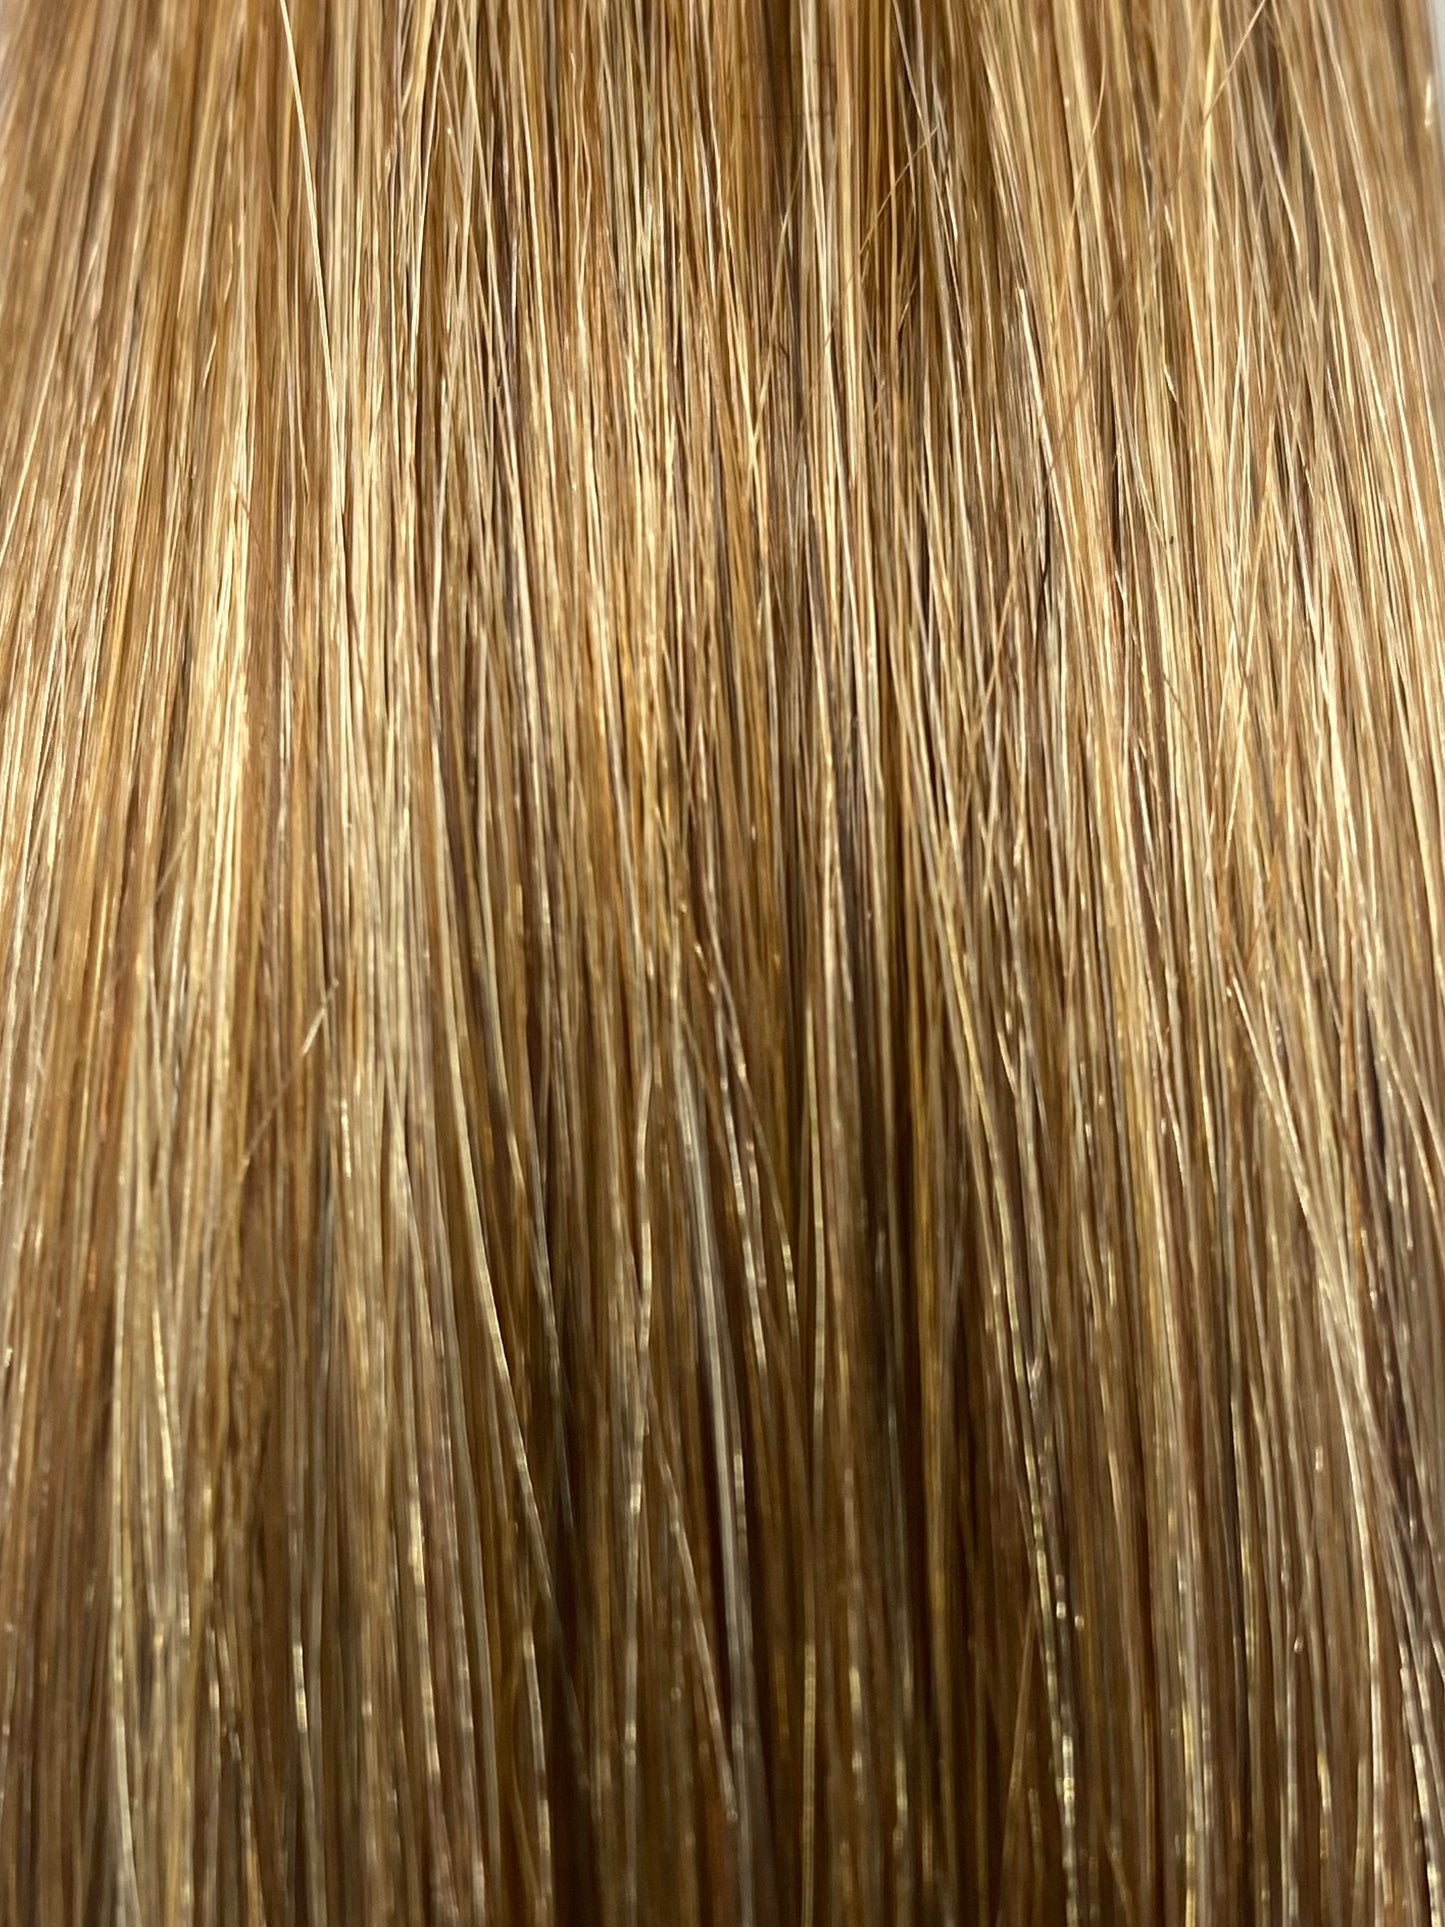 Weft hair extensions #18/24 - Double - 20 inches - Dark Blonde/Ash Blonde Highlight Weft DR Hair Products Co 